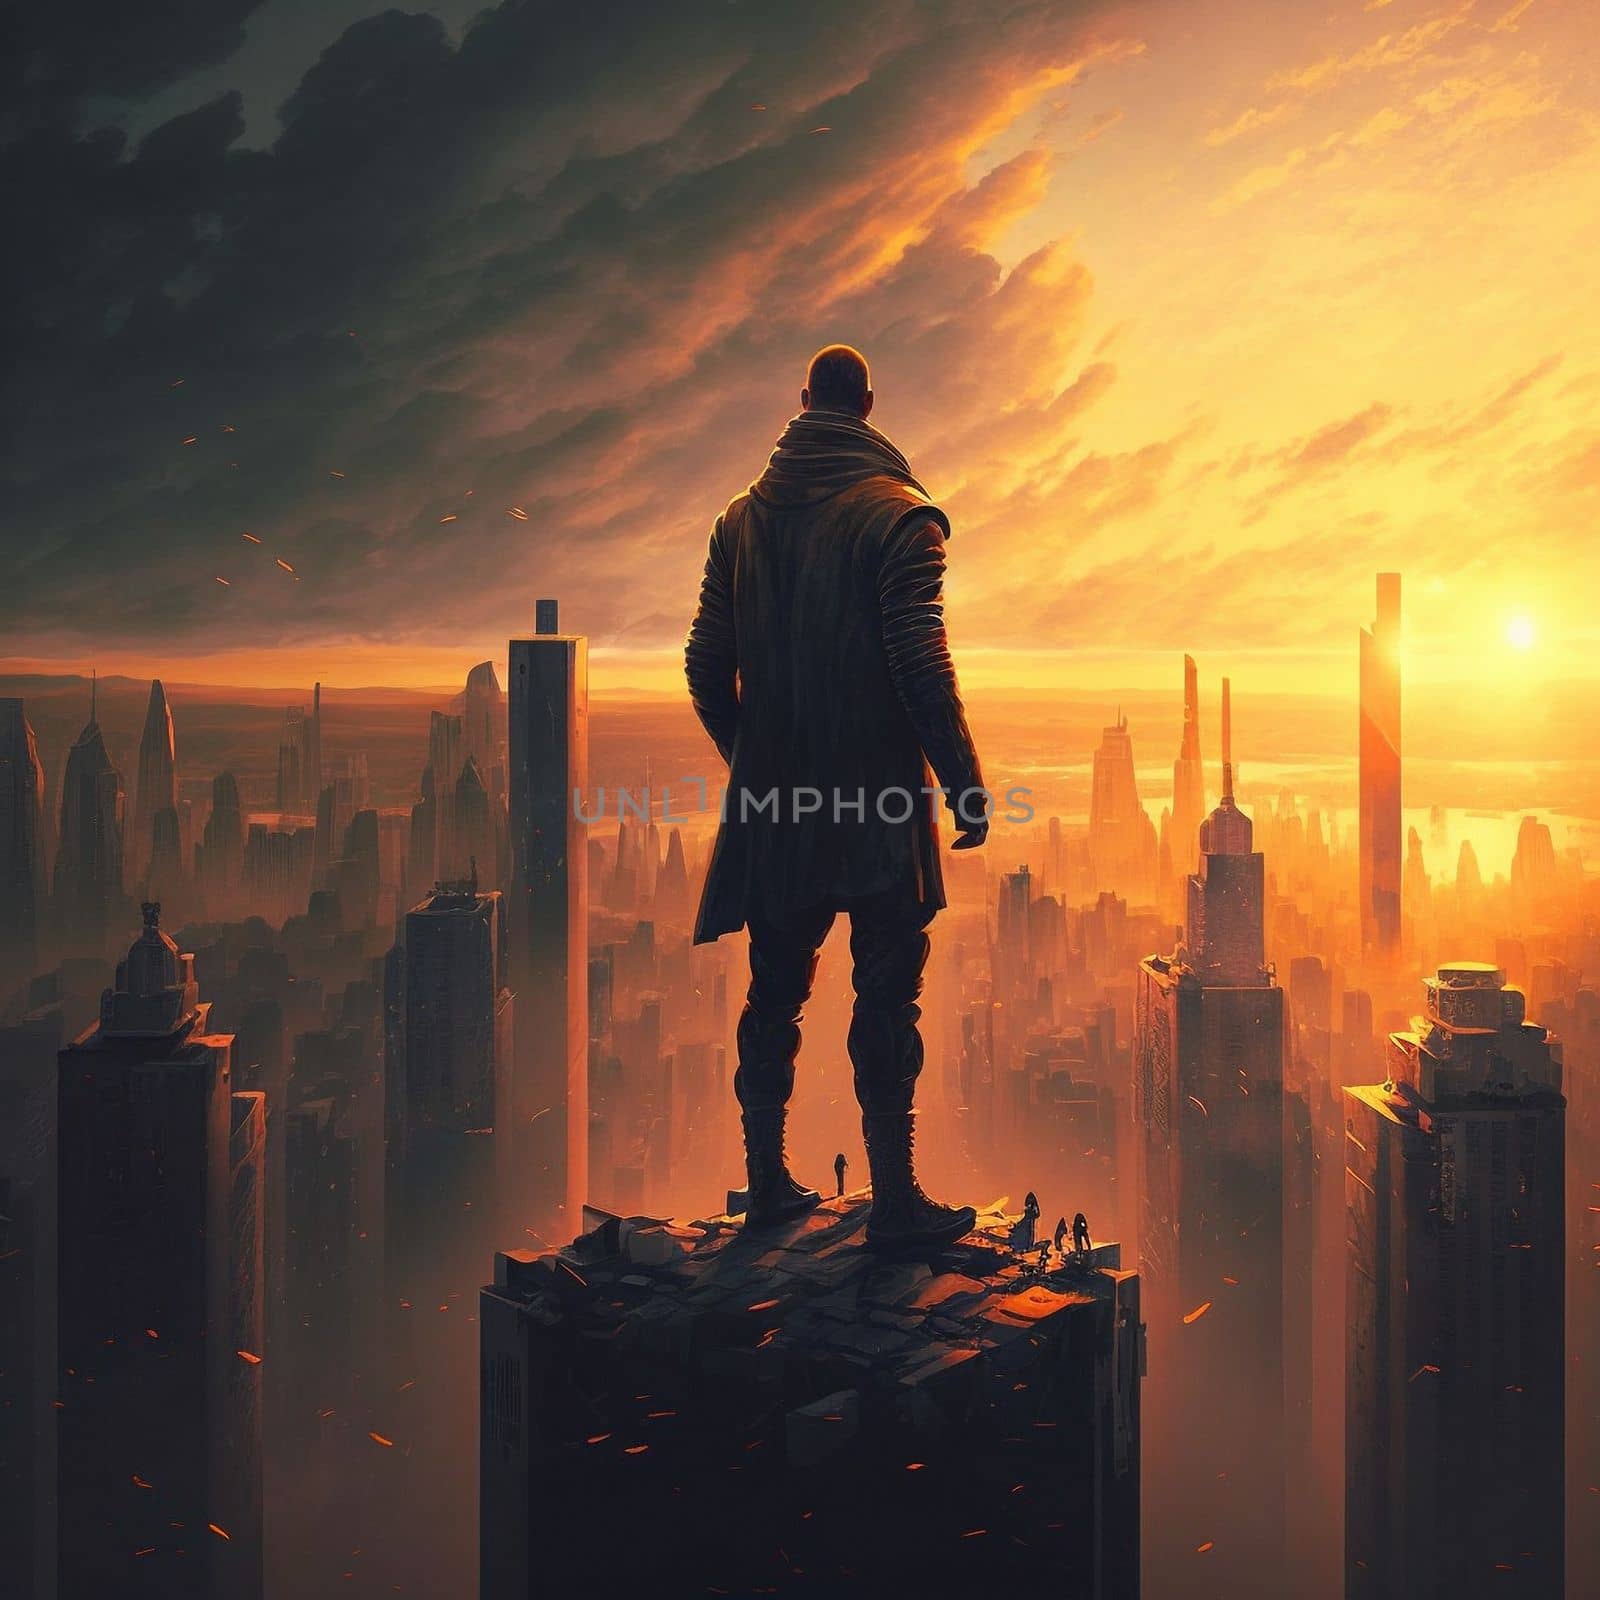 a man on top of skyscrapers looking at the city in the sunset rays by NeuroSky